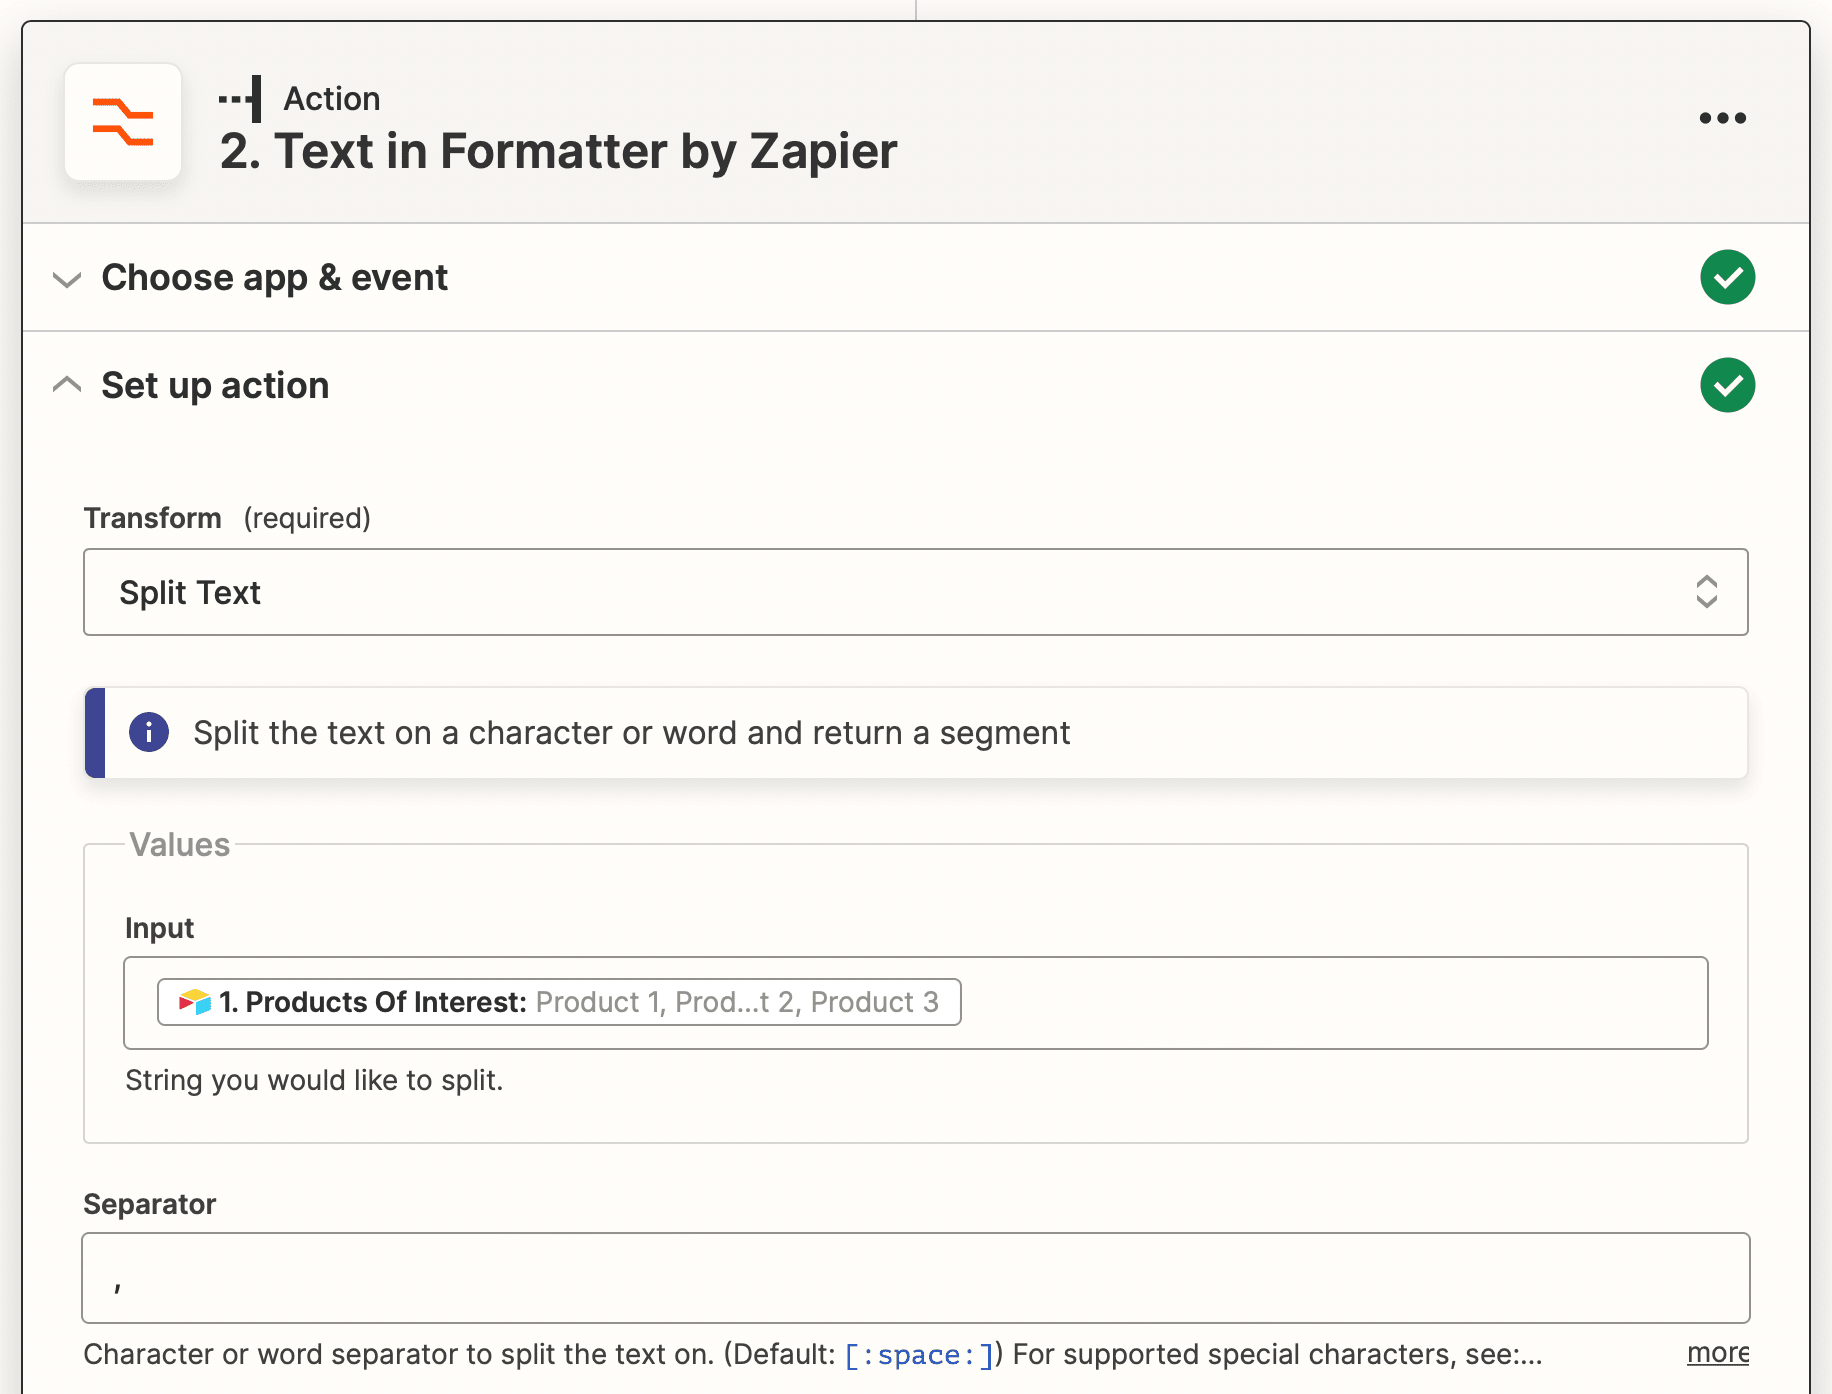 Screenshot of Zapier text in formatter action with split text transform